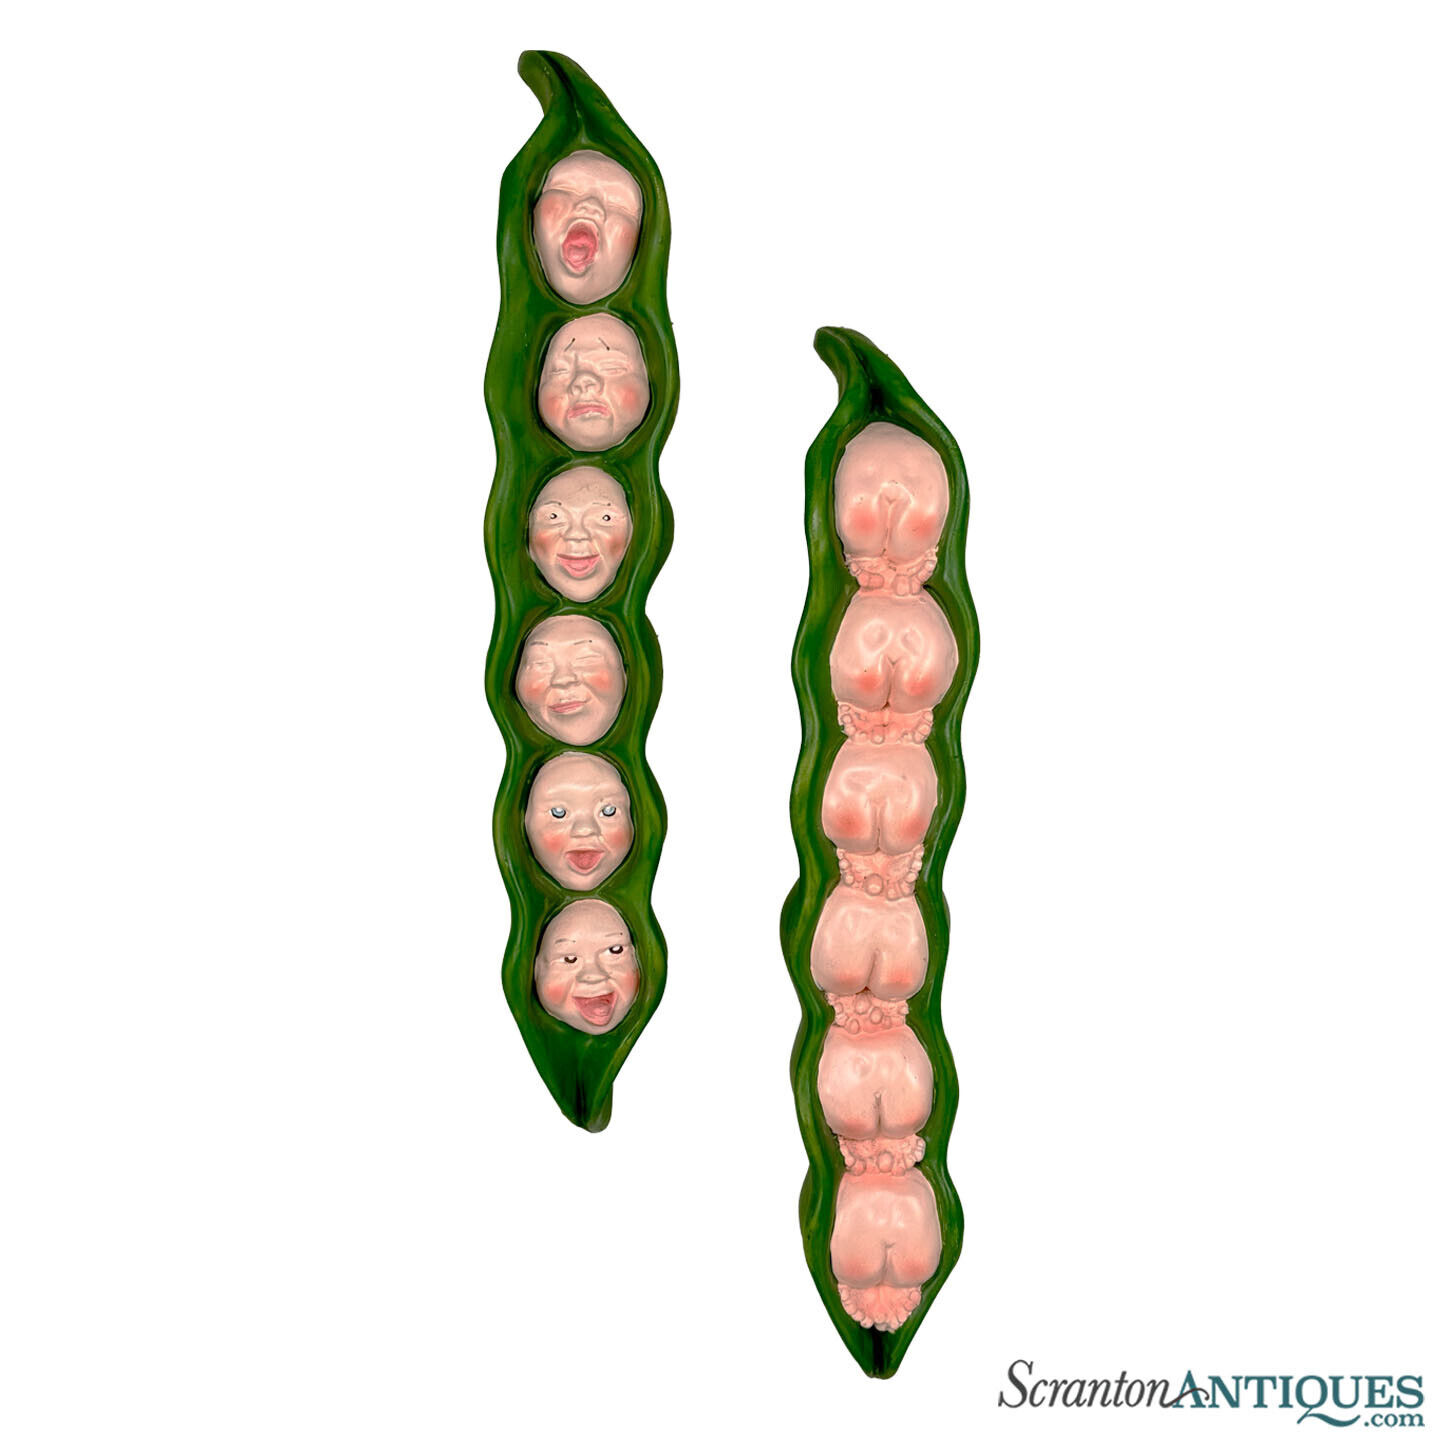 Vintage Oddity Baby Peas in a Pod Chalkware Wall Hanging Sculptures - A Pair